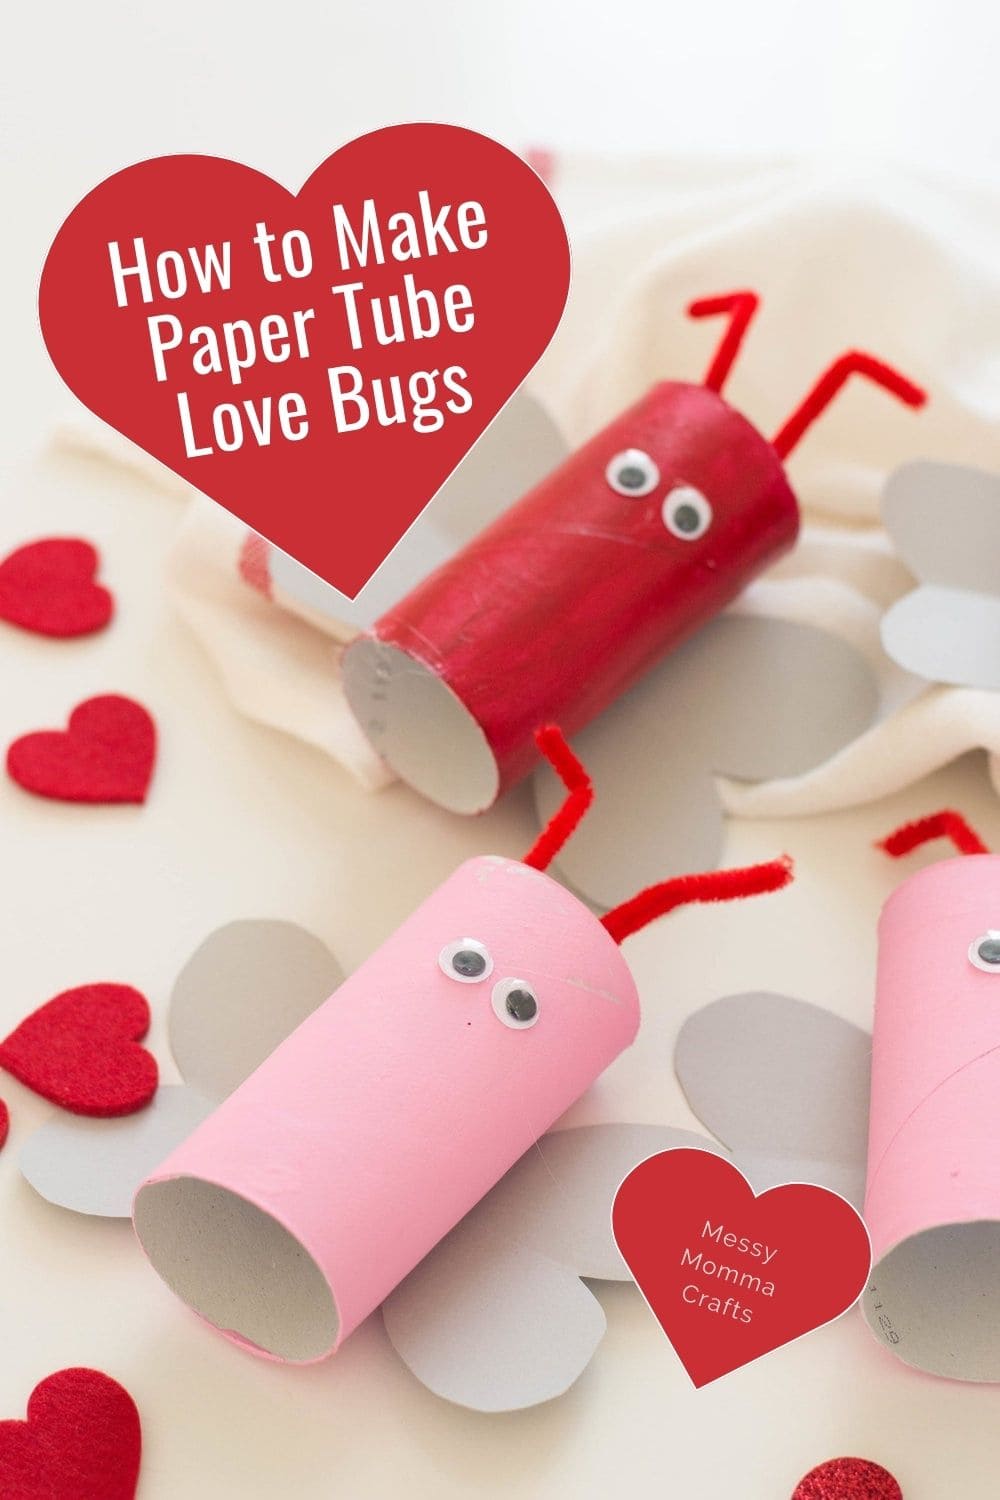 How to make paper tube love bugs.